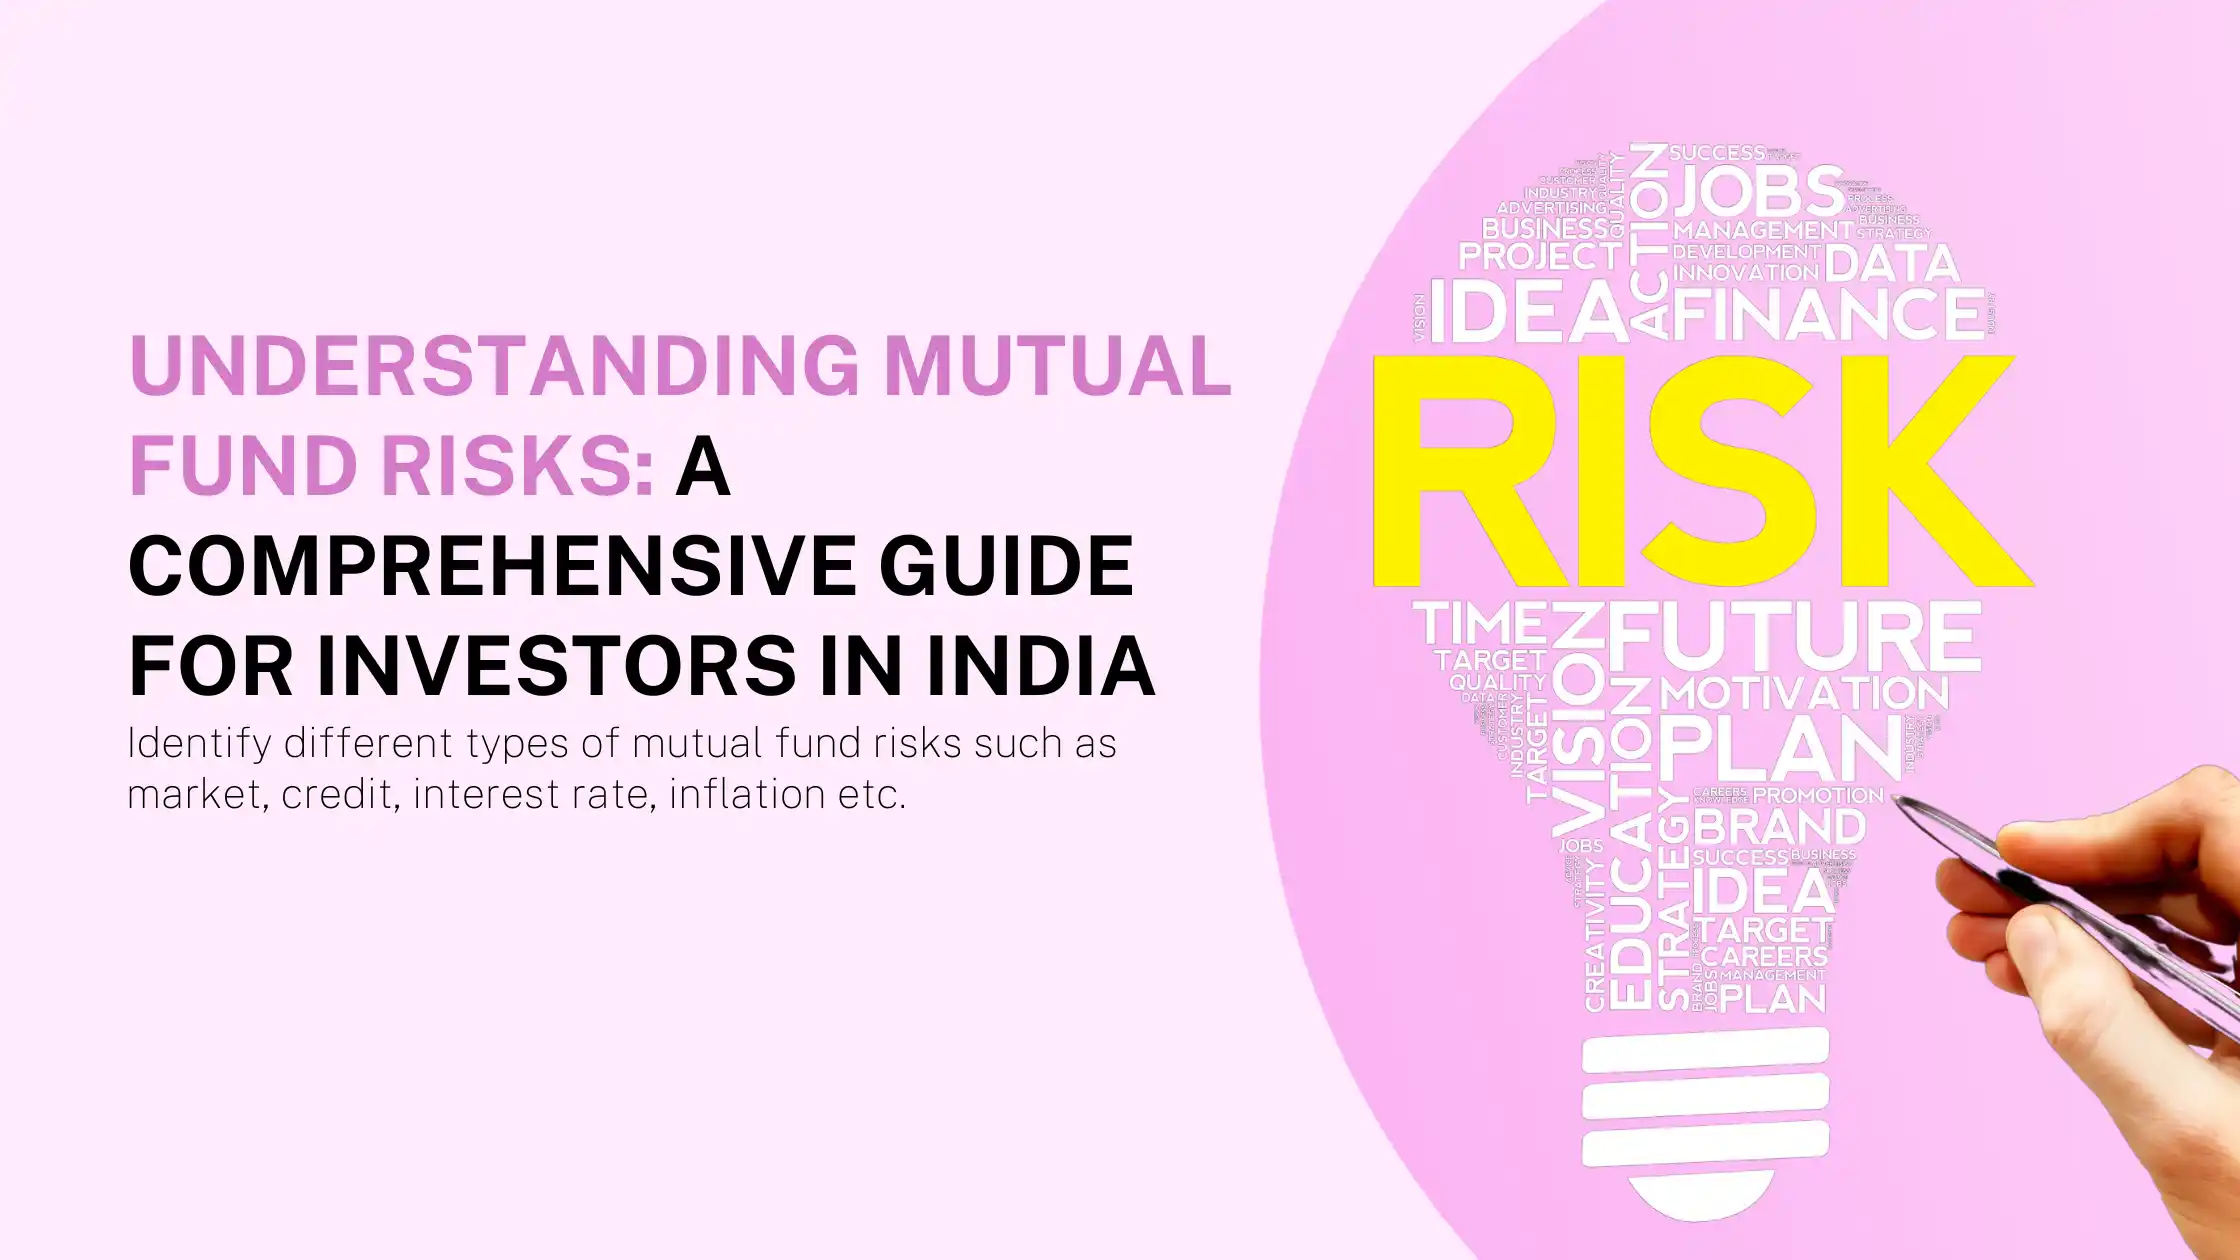 Understanding Mutual Fund Risks: A Comprehensive Guide for Investors in India